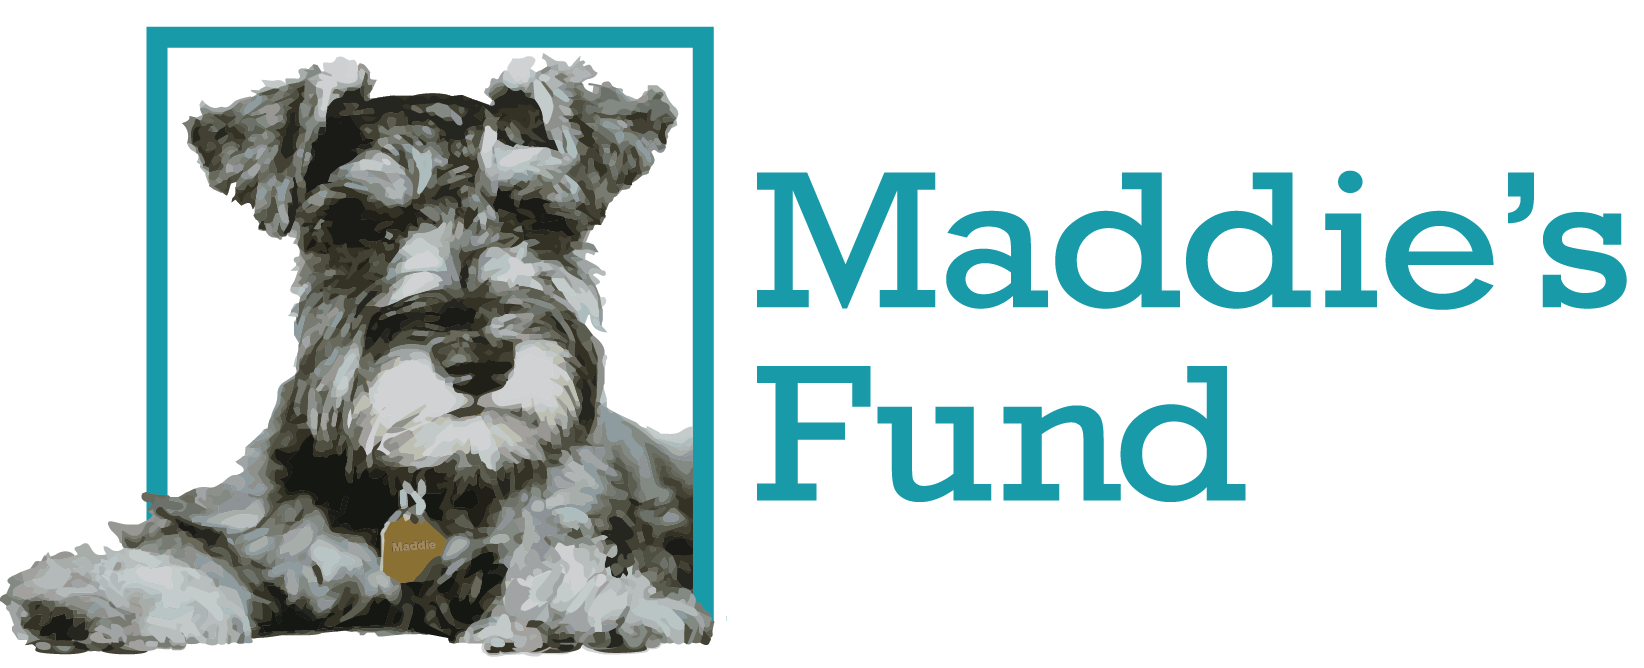 Maddie's Fund logo - a Scottie dog sits in a frame to the left, with Maddie's Fund written in a teal serifed font to the right.